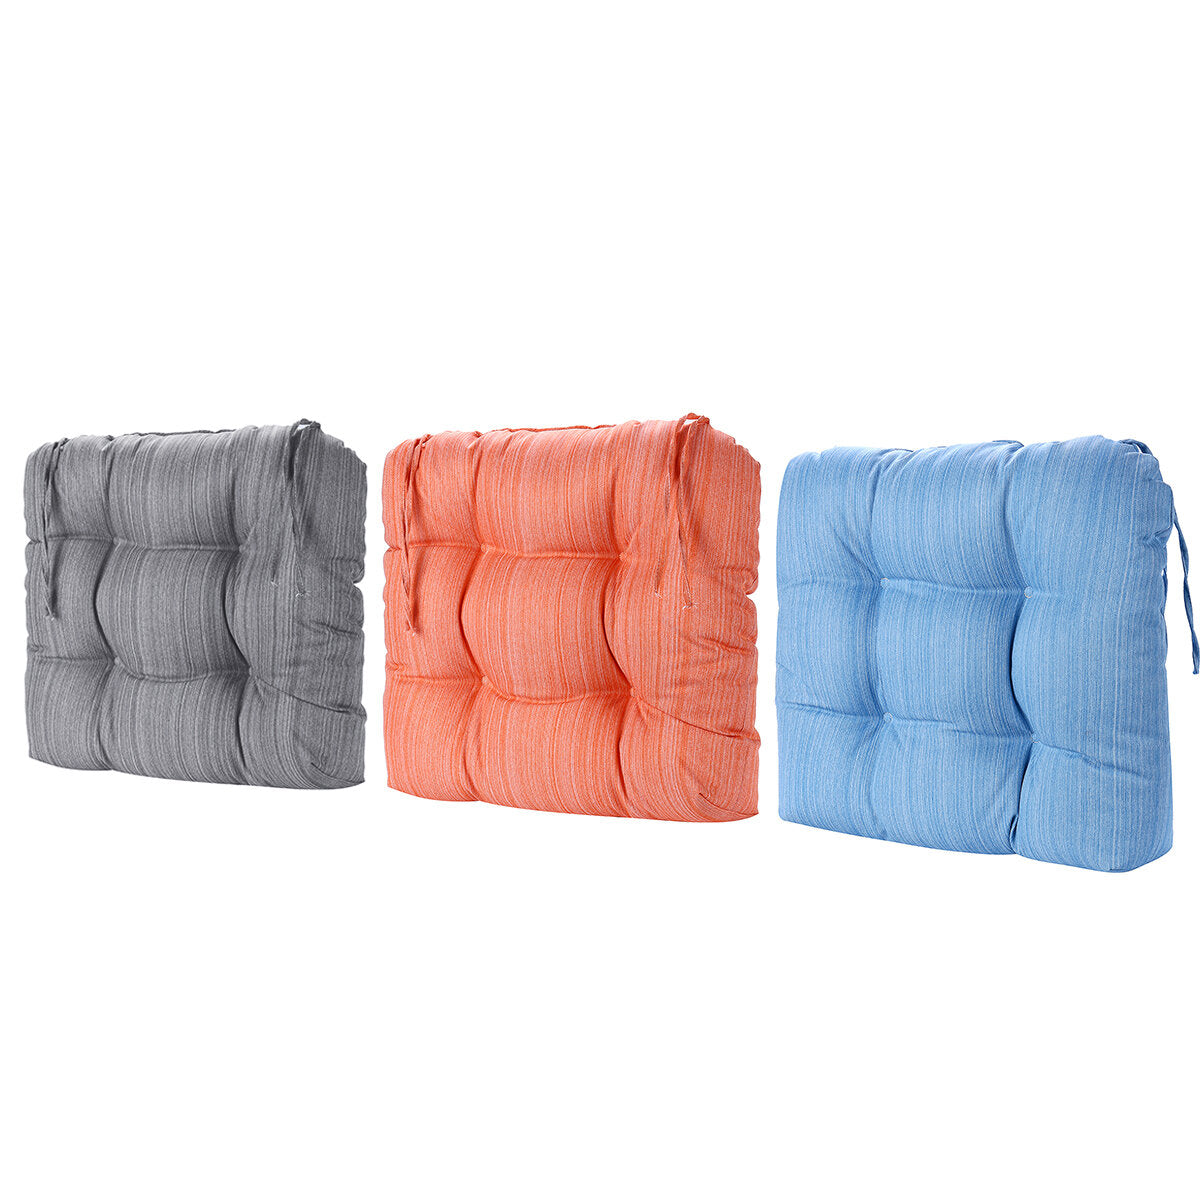 Outdoor Chair Cushion Waterproof Sofa Padded Cushion PP Cotton with Bandage Home Office Student Seat Supplies